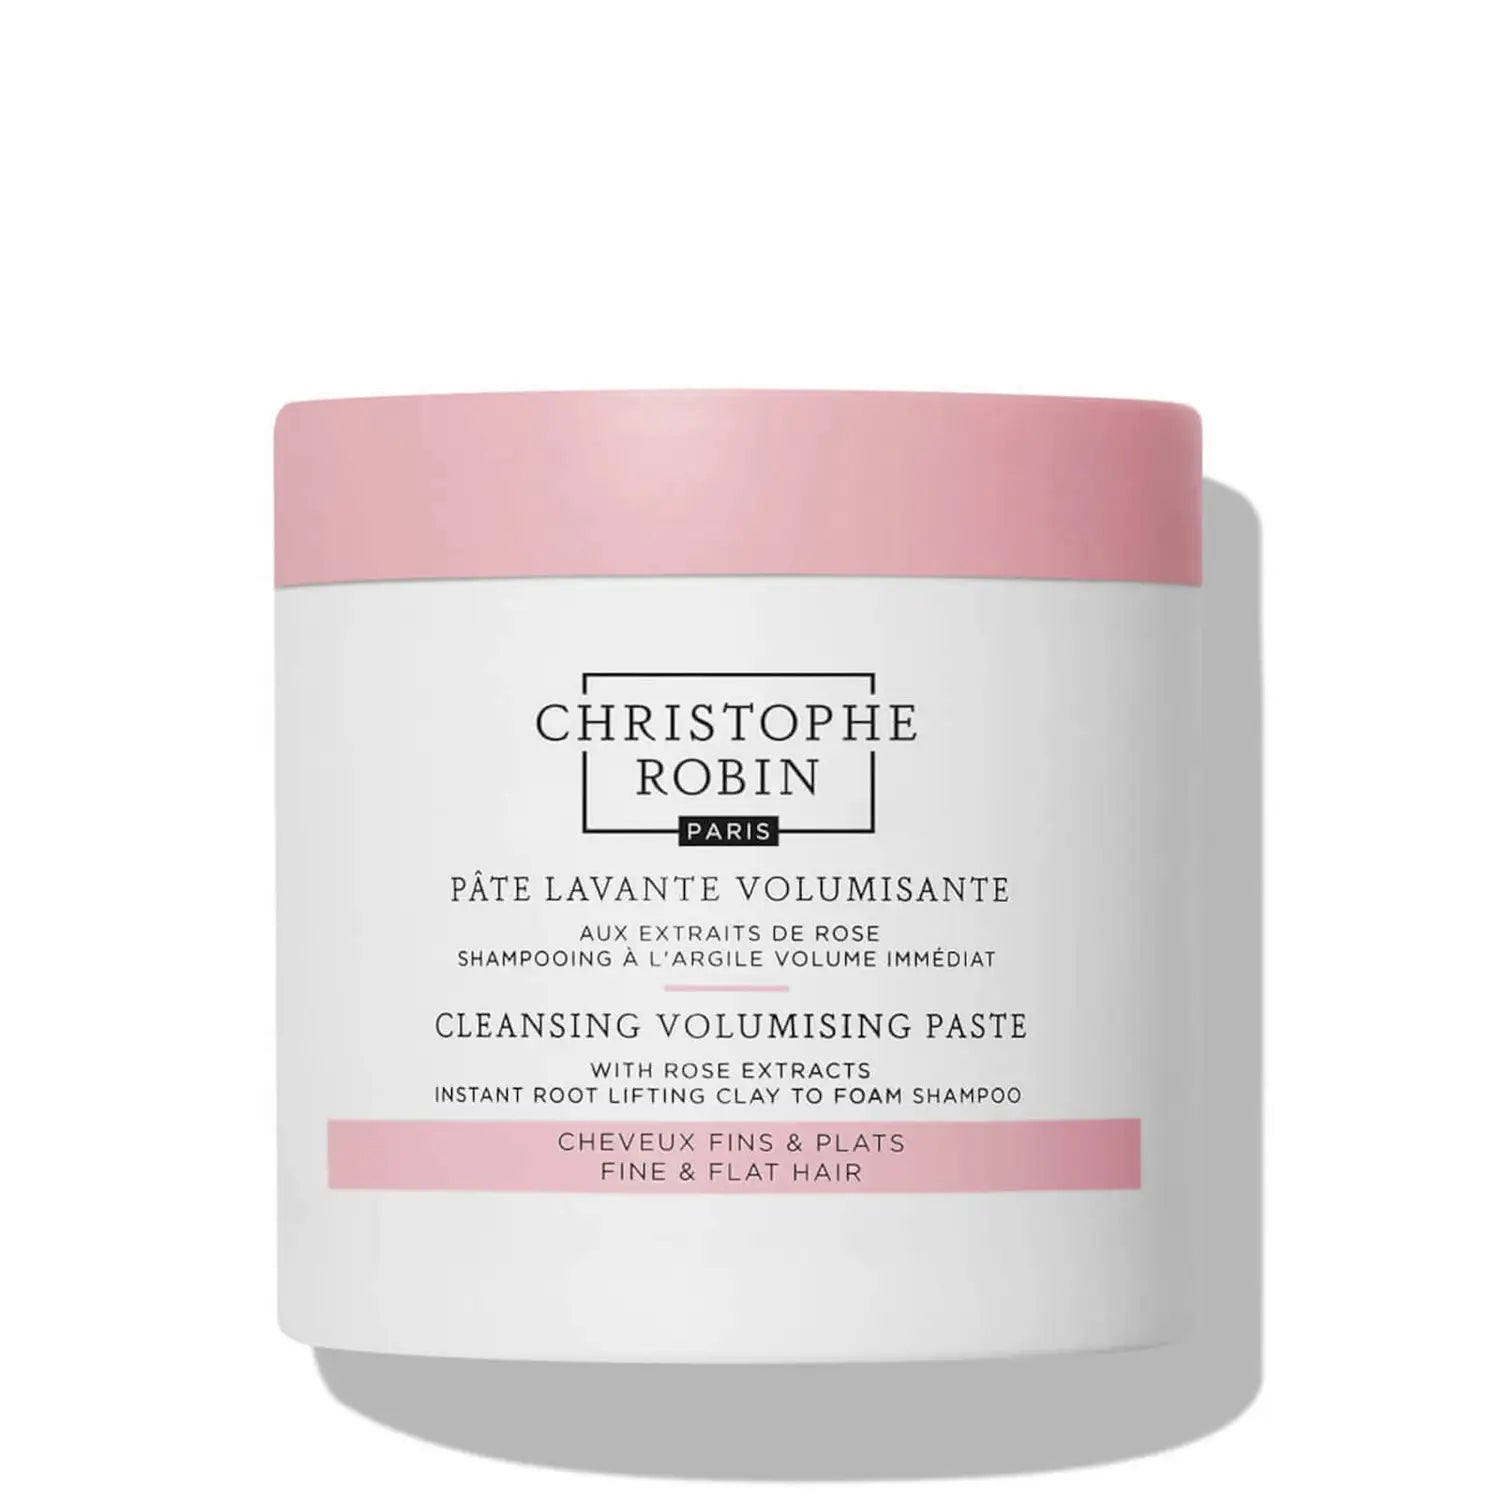 Luxury_haircare_Christoph_robin_Cleasing_volumising_paste_with_rose_extracts